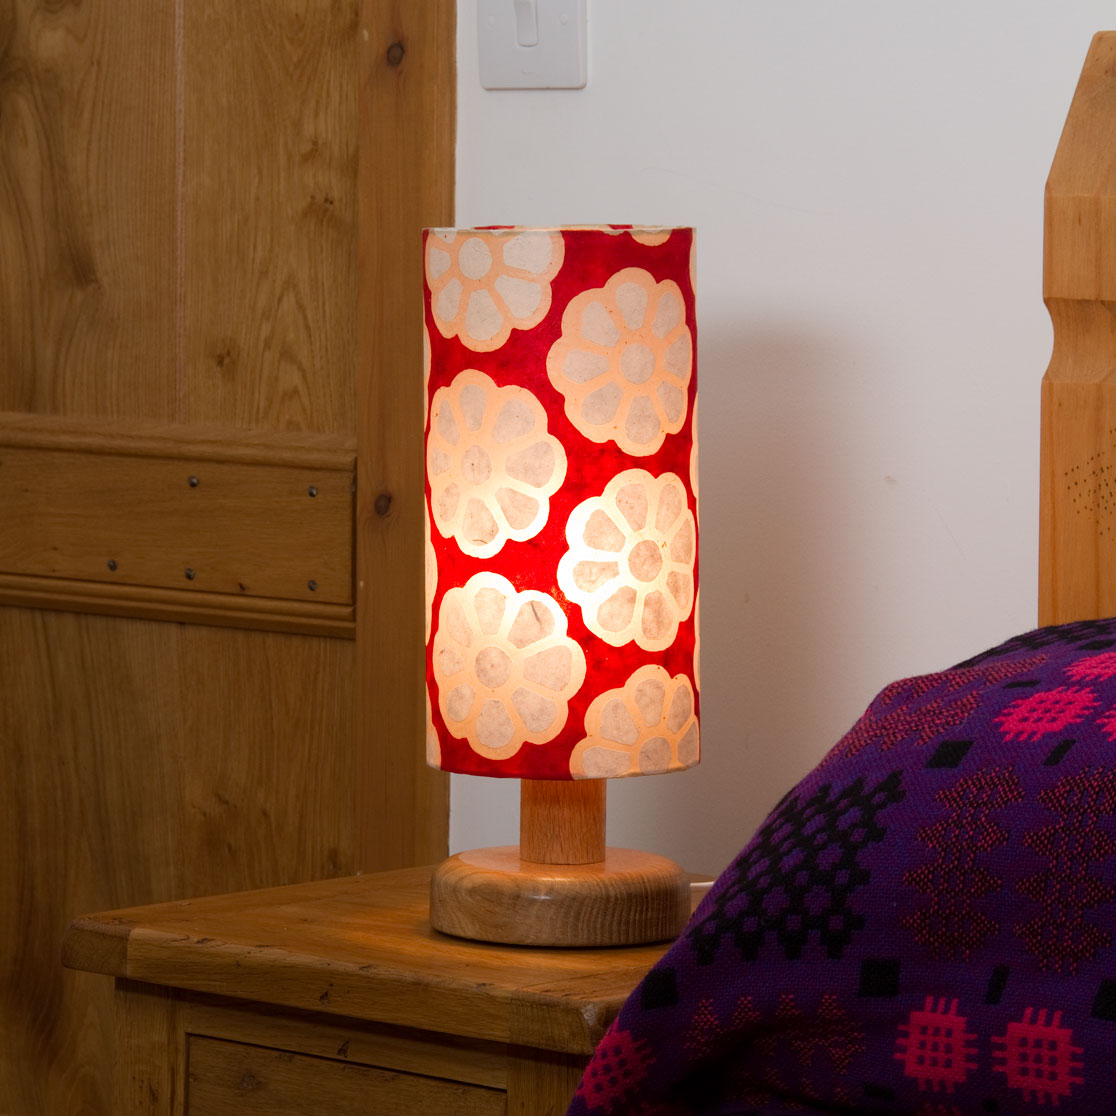 Round Oak Table Lamp (15cm) with 15cm x 30cm Lamp Shade in Batik Big Flowers Red P18